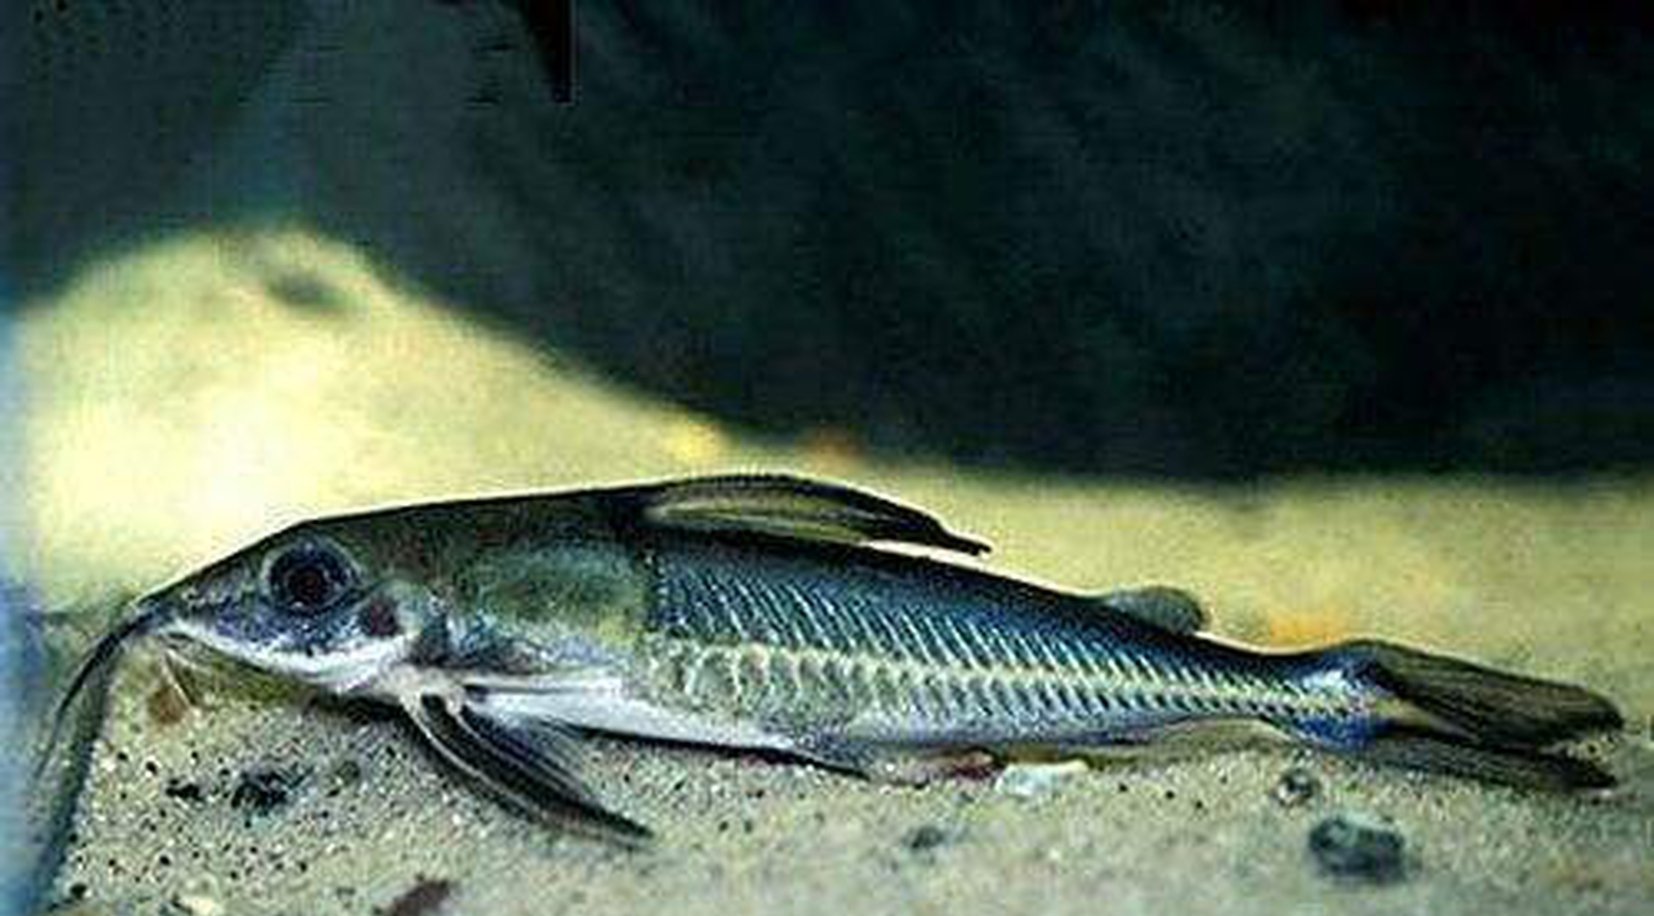 x2 Hemidoras Mouse Catfish Med 2" - 3" Each - Freshwater Fish Free Shipping-Freshwater Fish Package-www.YourFishStore.com